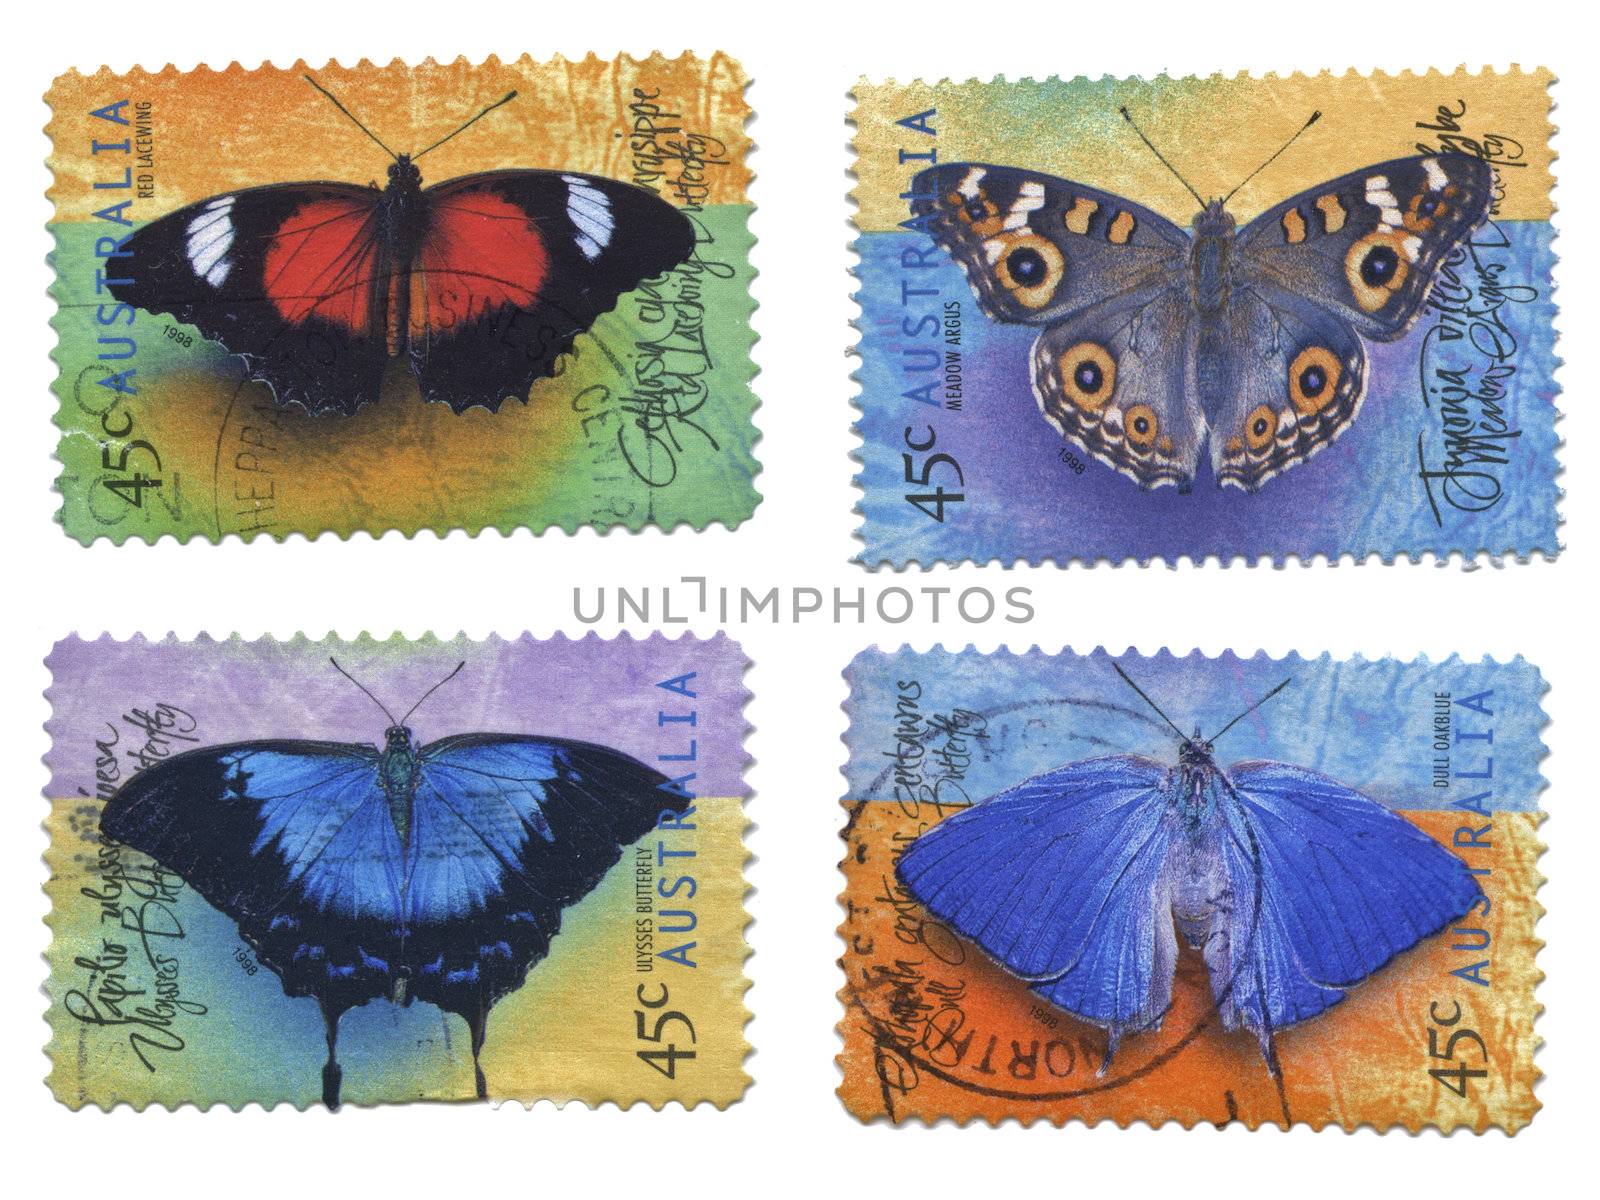 Australia - CIRCA 1988: Range stamp printed in Australia shows image of the Butterfly's in 1988